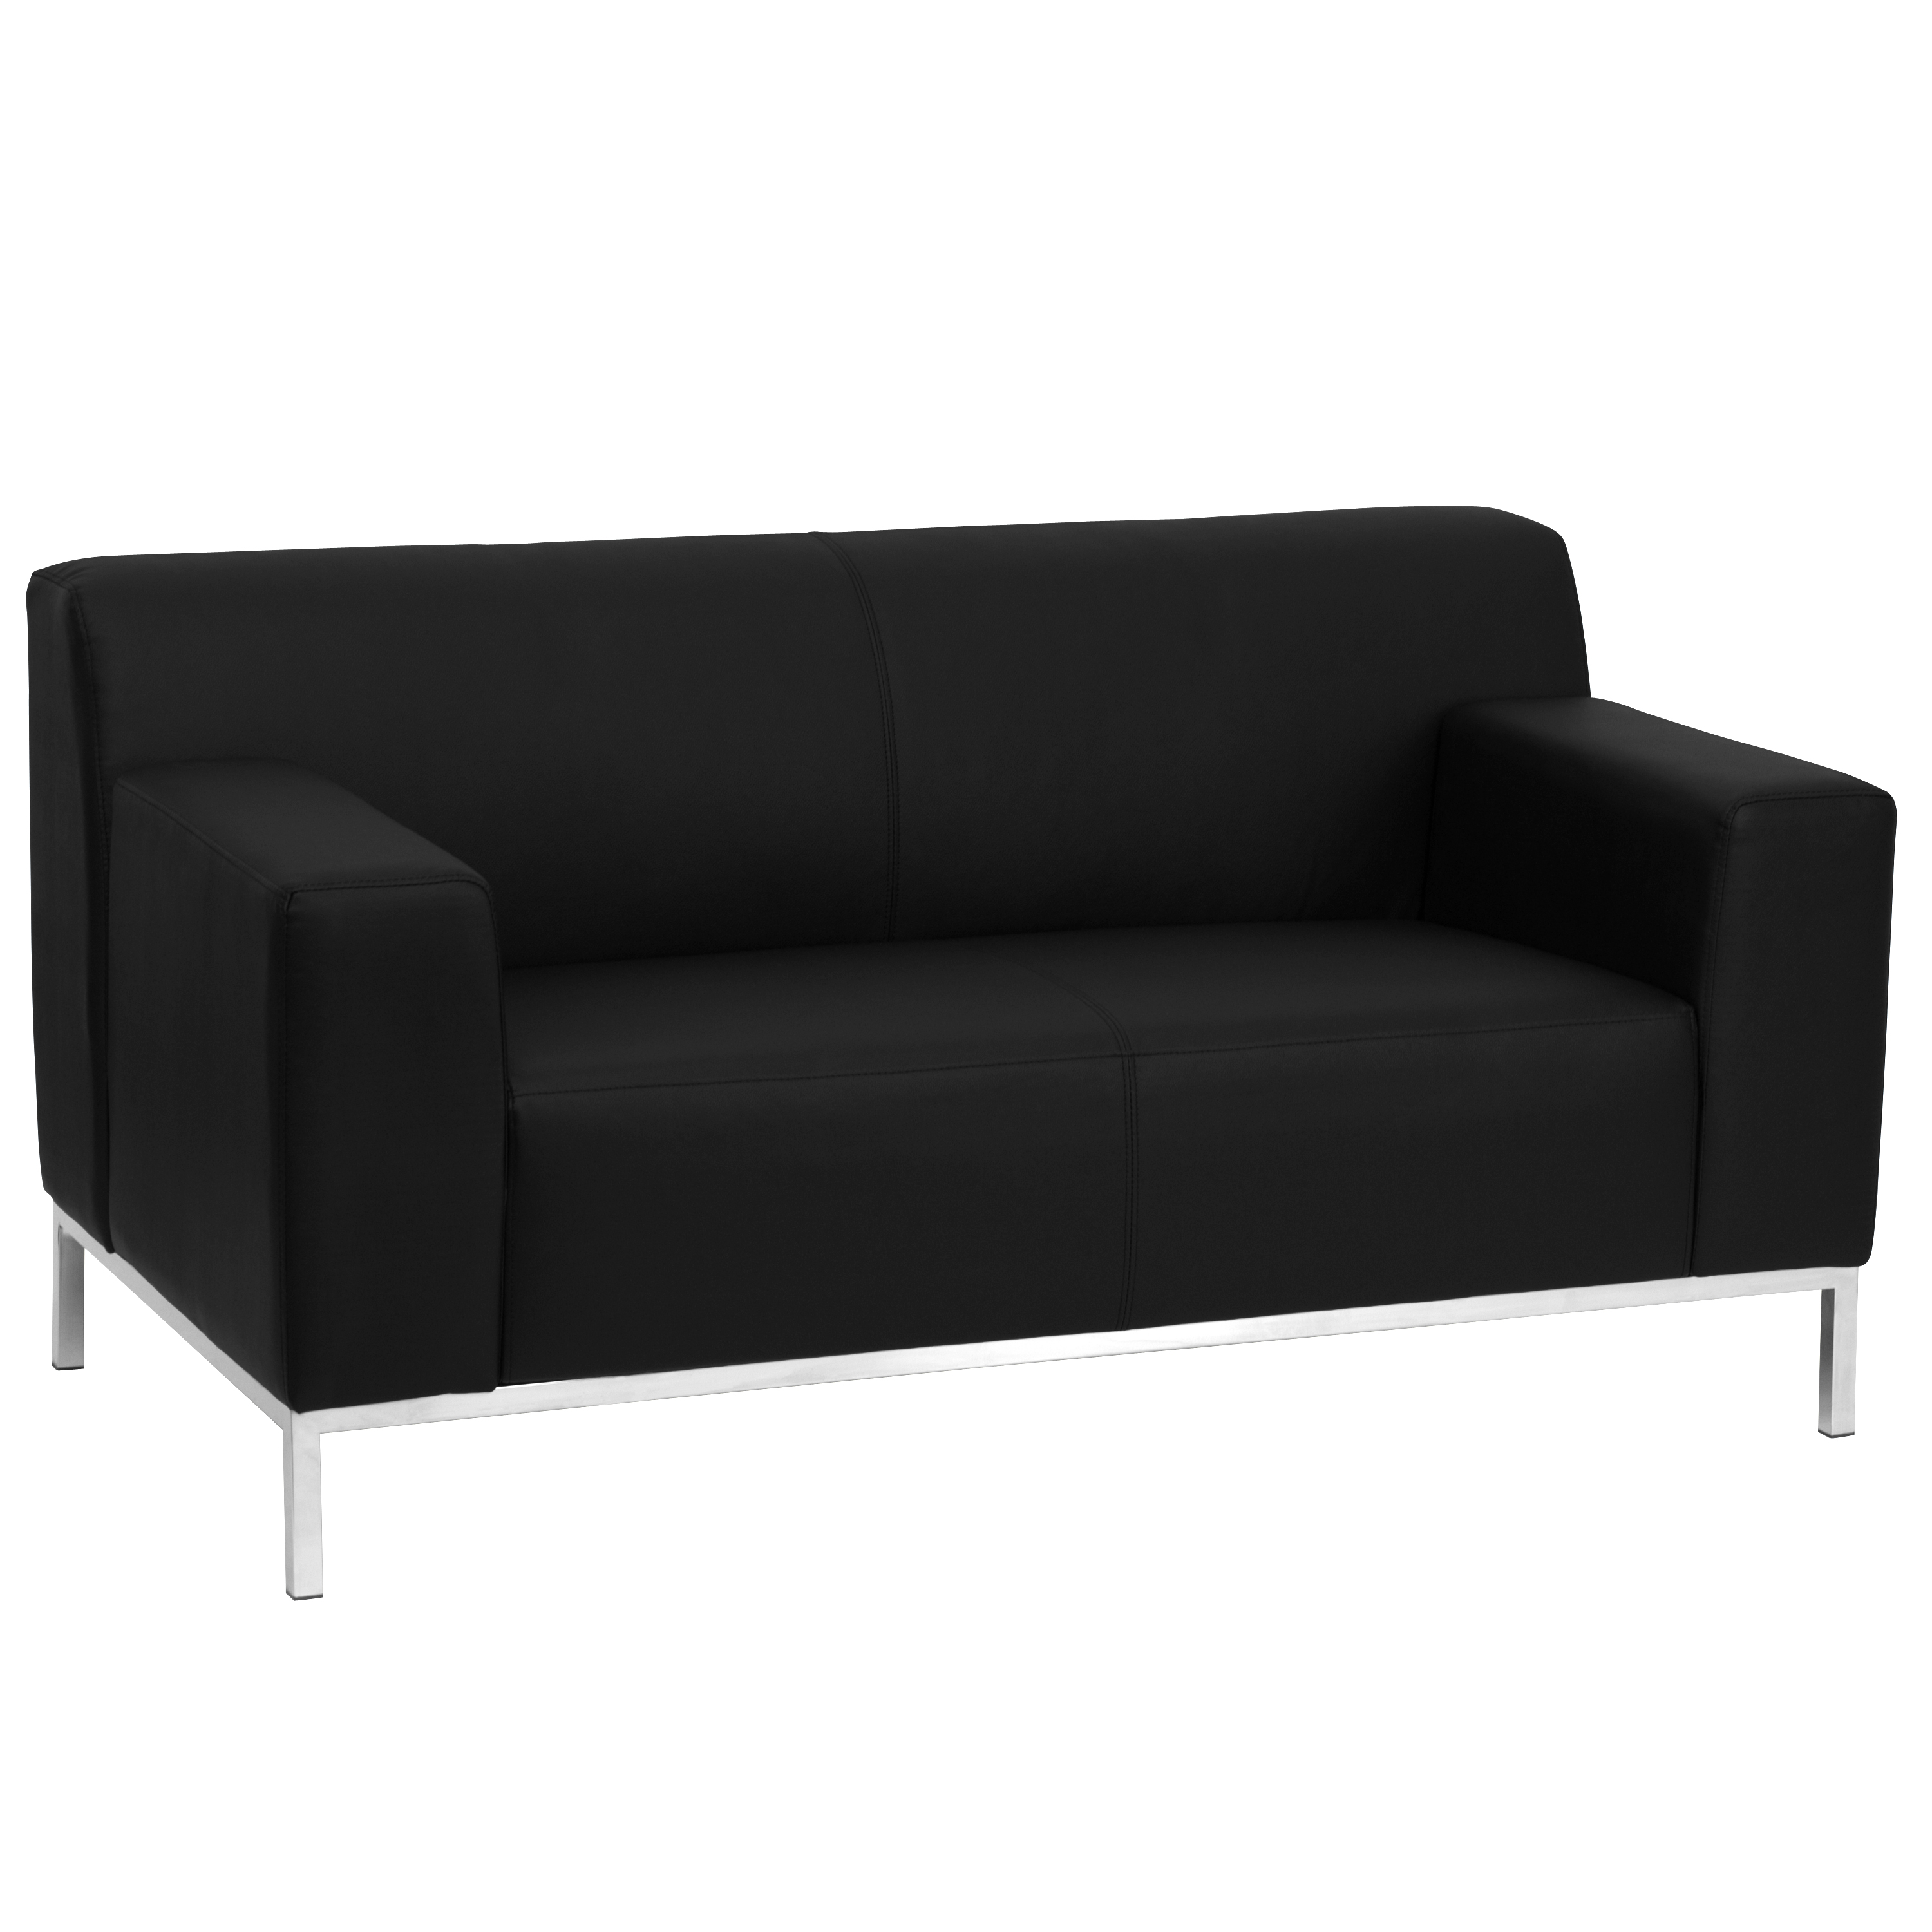 Flash Furniture HERCULES Definity Series Contemporary Black LeatherSoft Loveseat - image 1 of 5